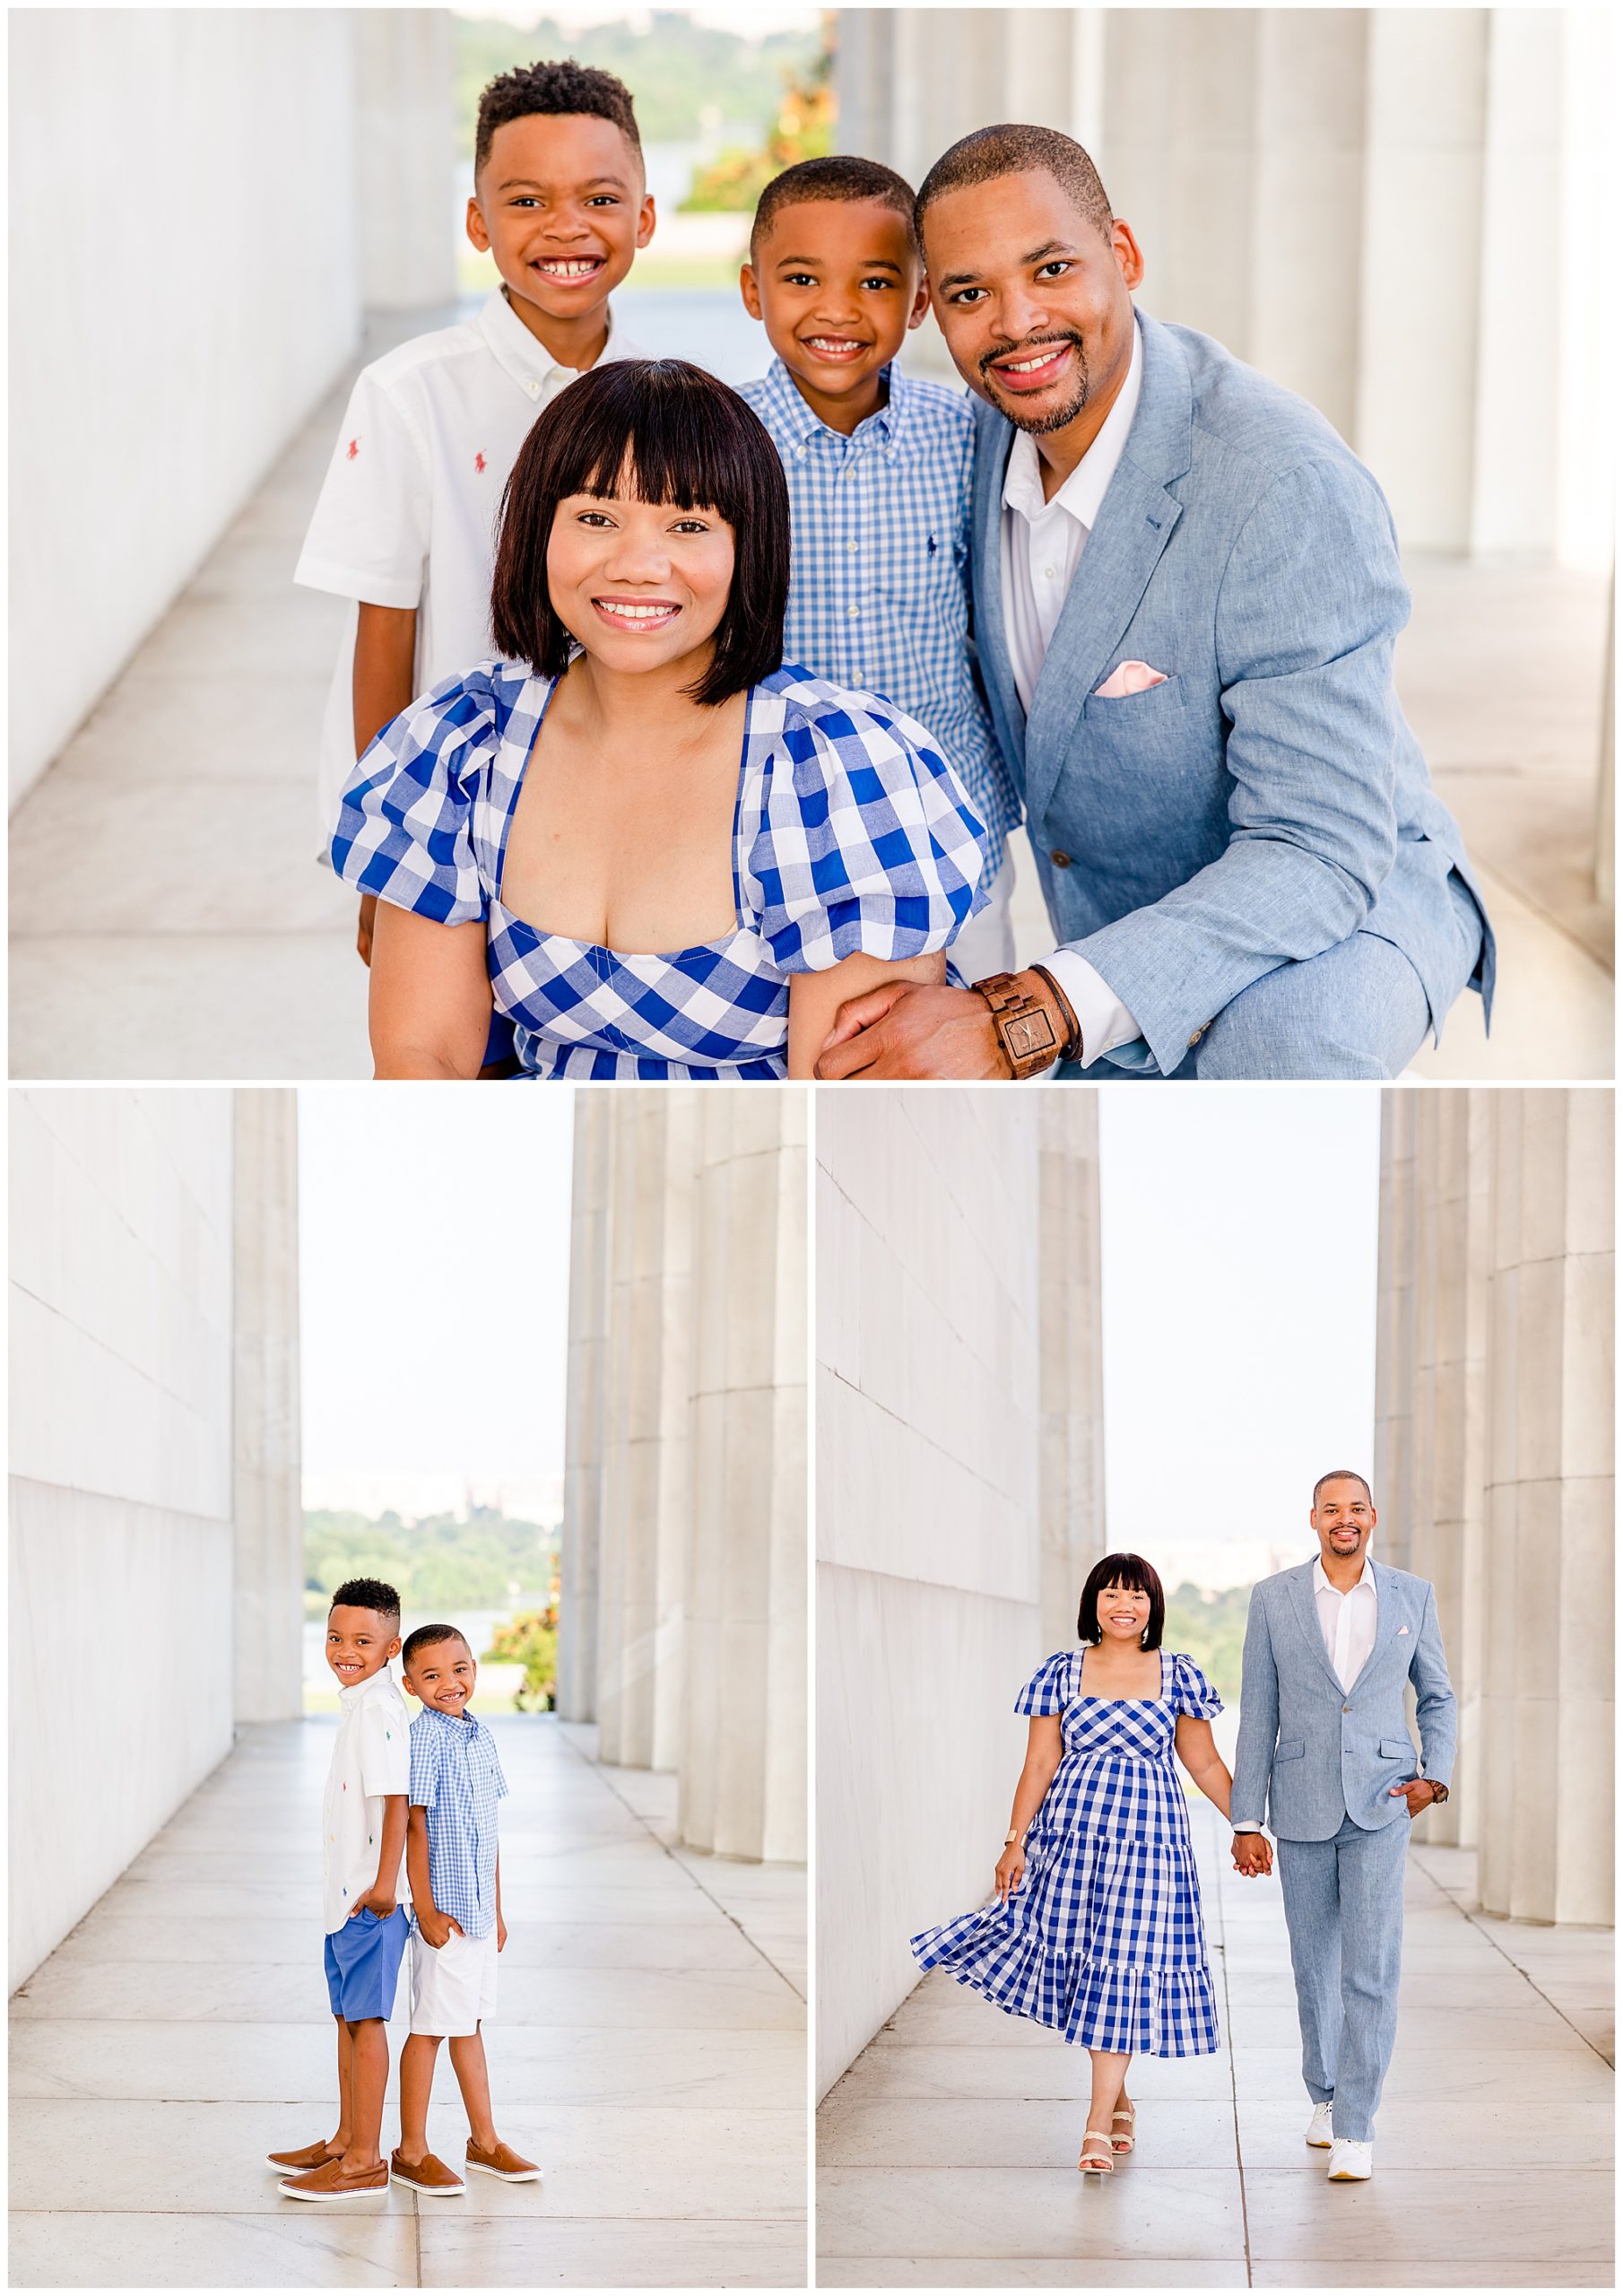 summer Lincoln Memorial family photos, Lincoln Memorial portraits, DC family photos, National Mall family photos, summer of four, family portrait poses, Lincoln Memorial portraits, DC family photographer, Rachel E.H. Photography, brothers with backs together, parents holding hands